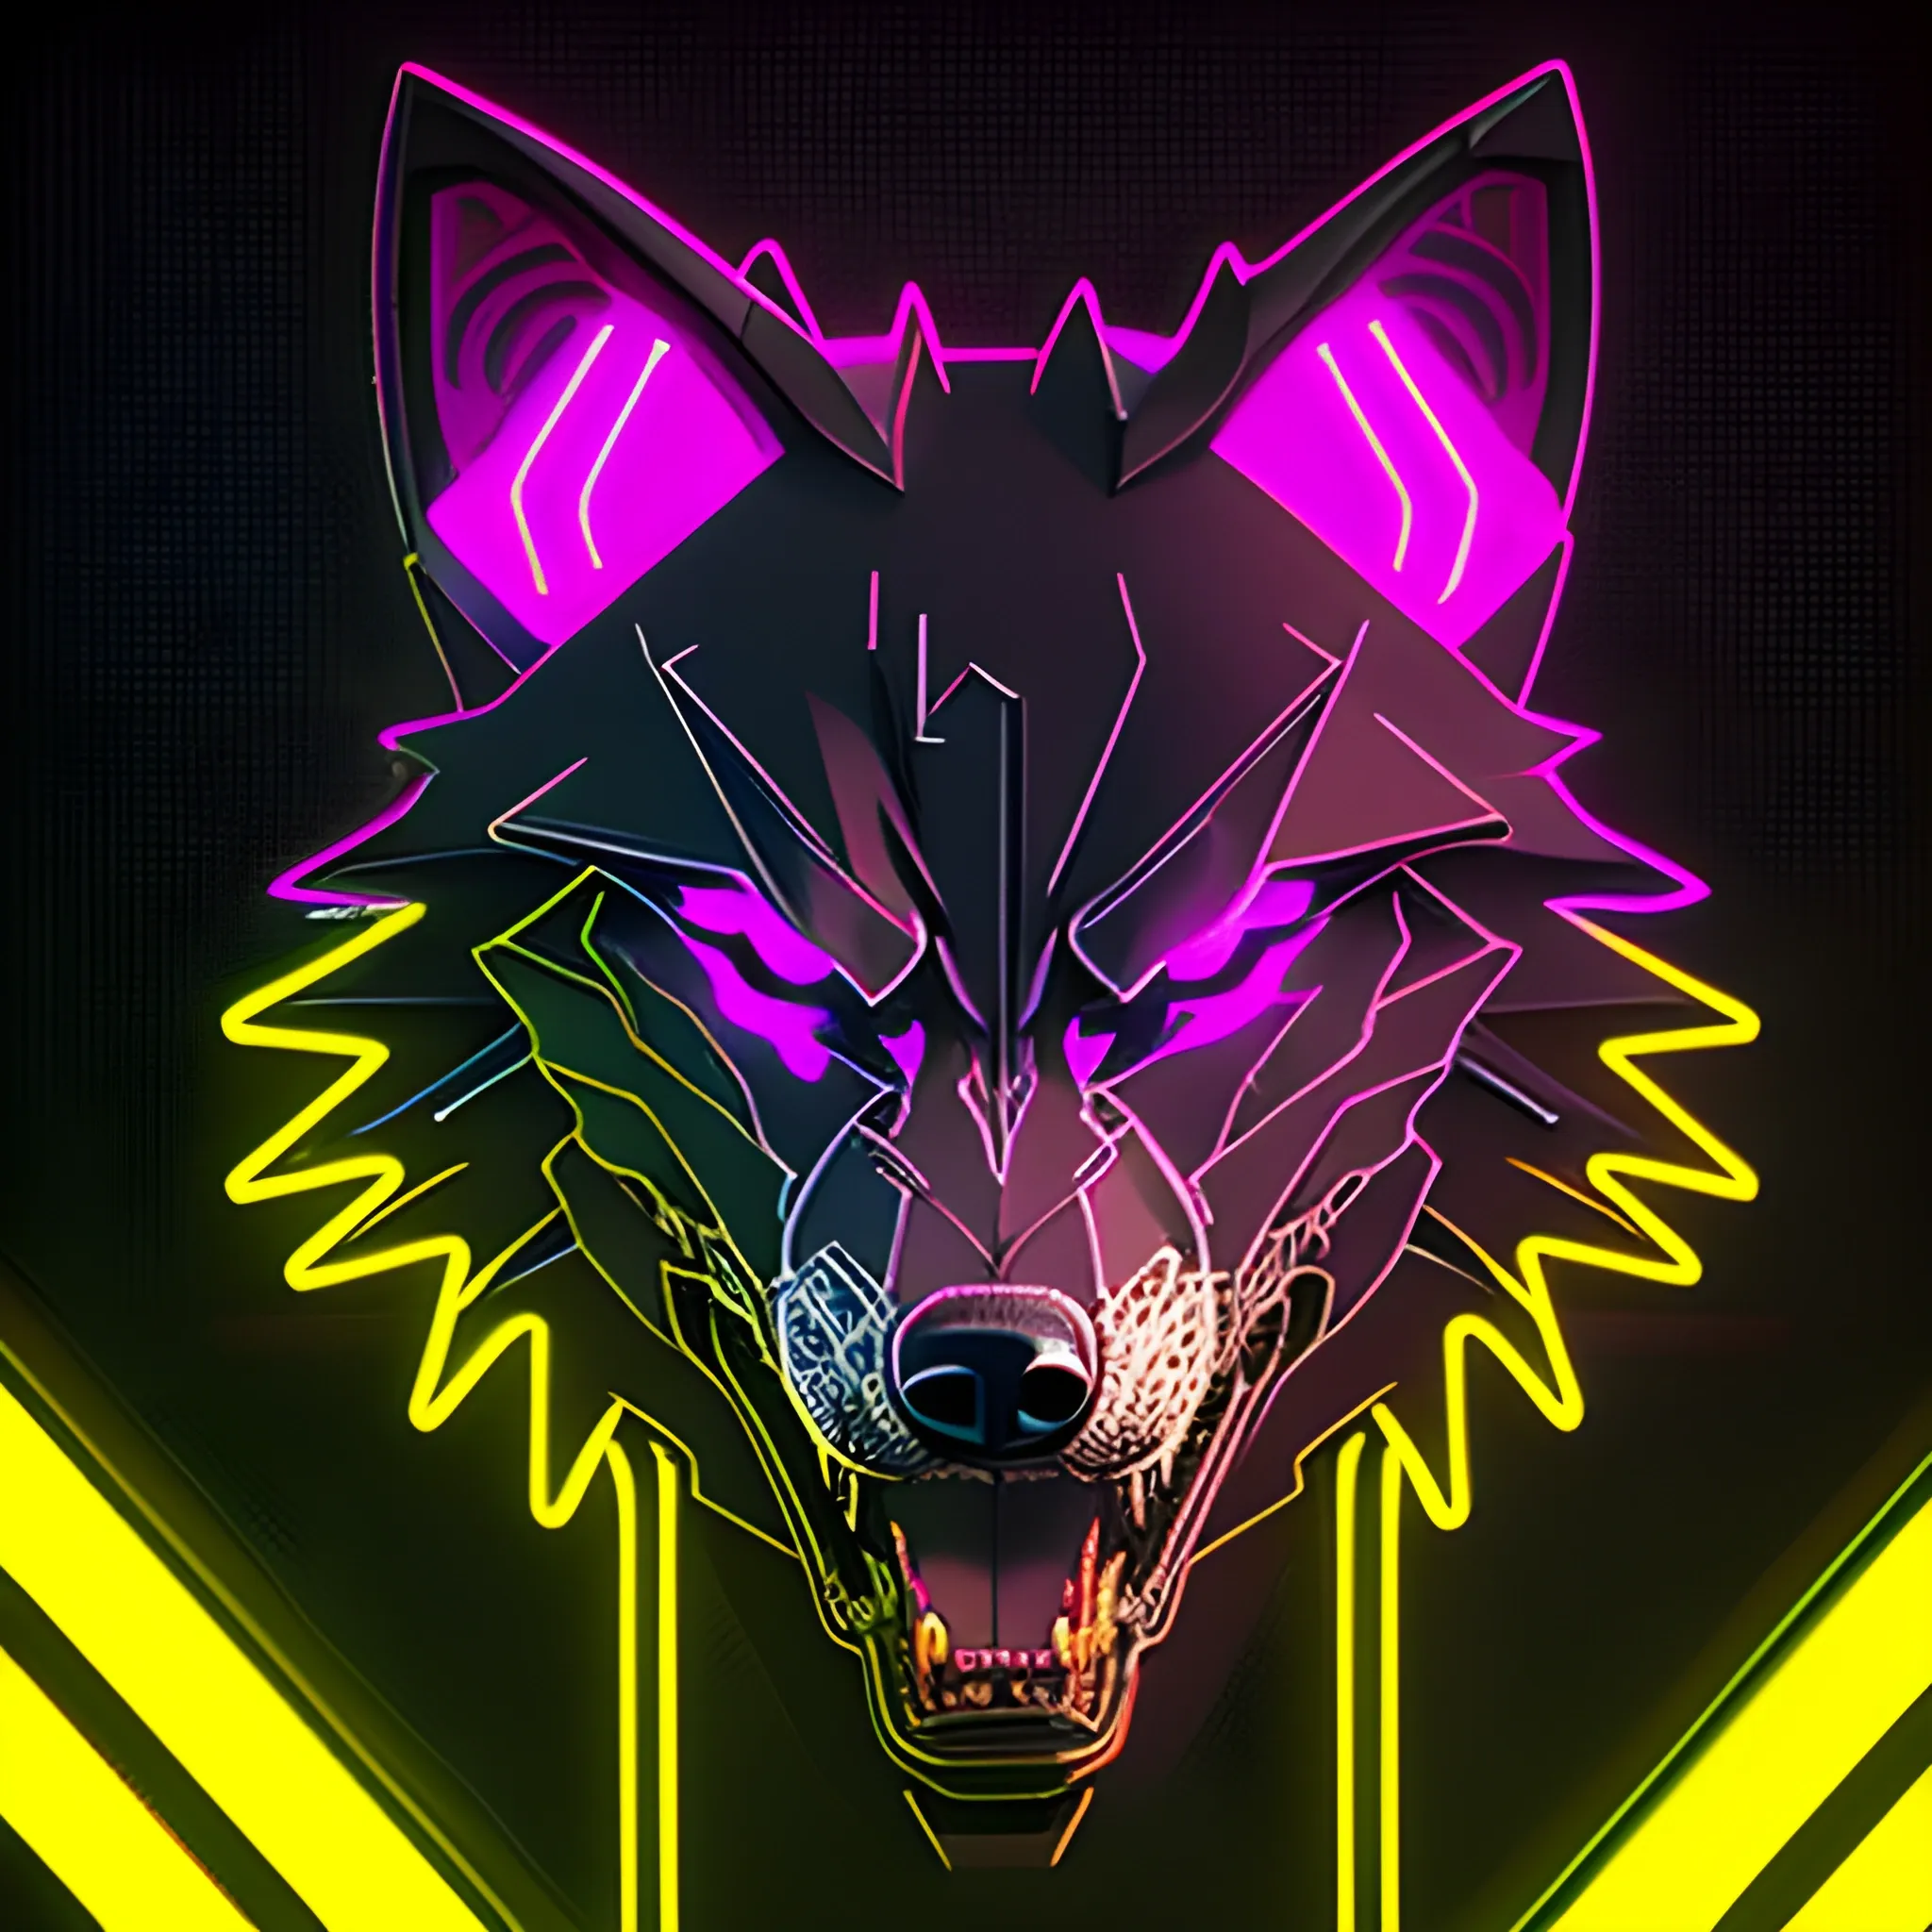 An angry cyberpunk wolf logo, using the yellow neon color, with an "A"at the background, 3D